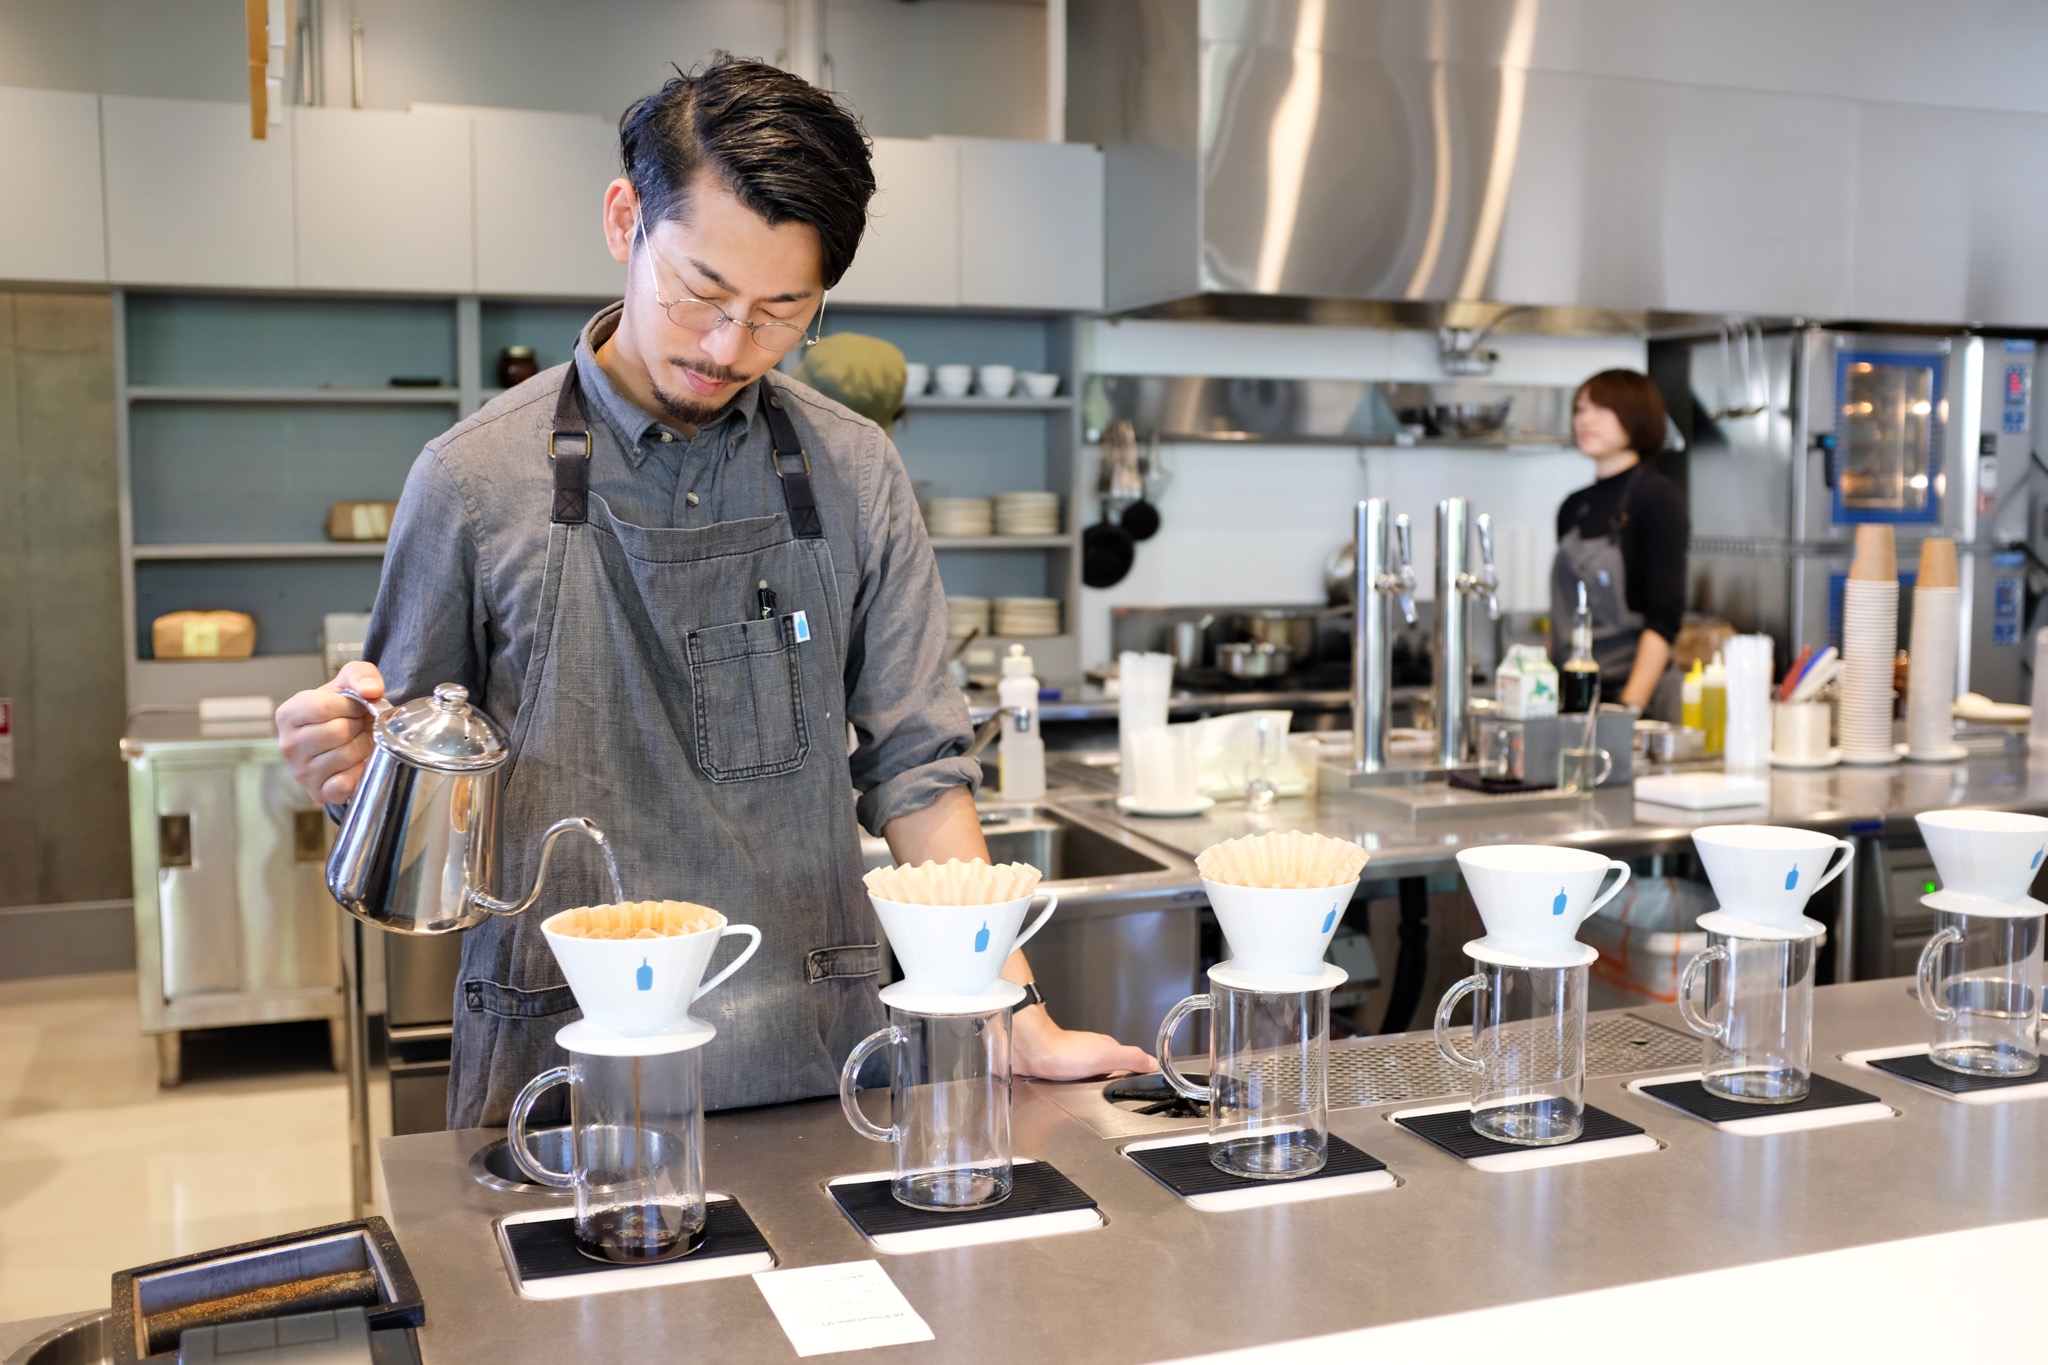 A Blue Bottle barista using their special designed drippers